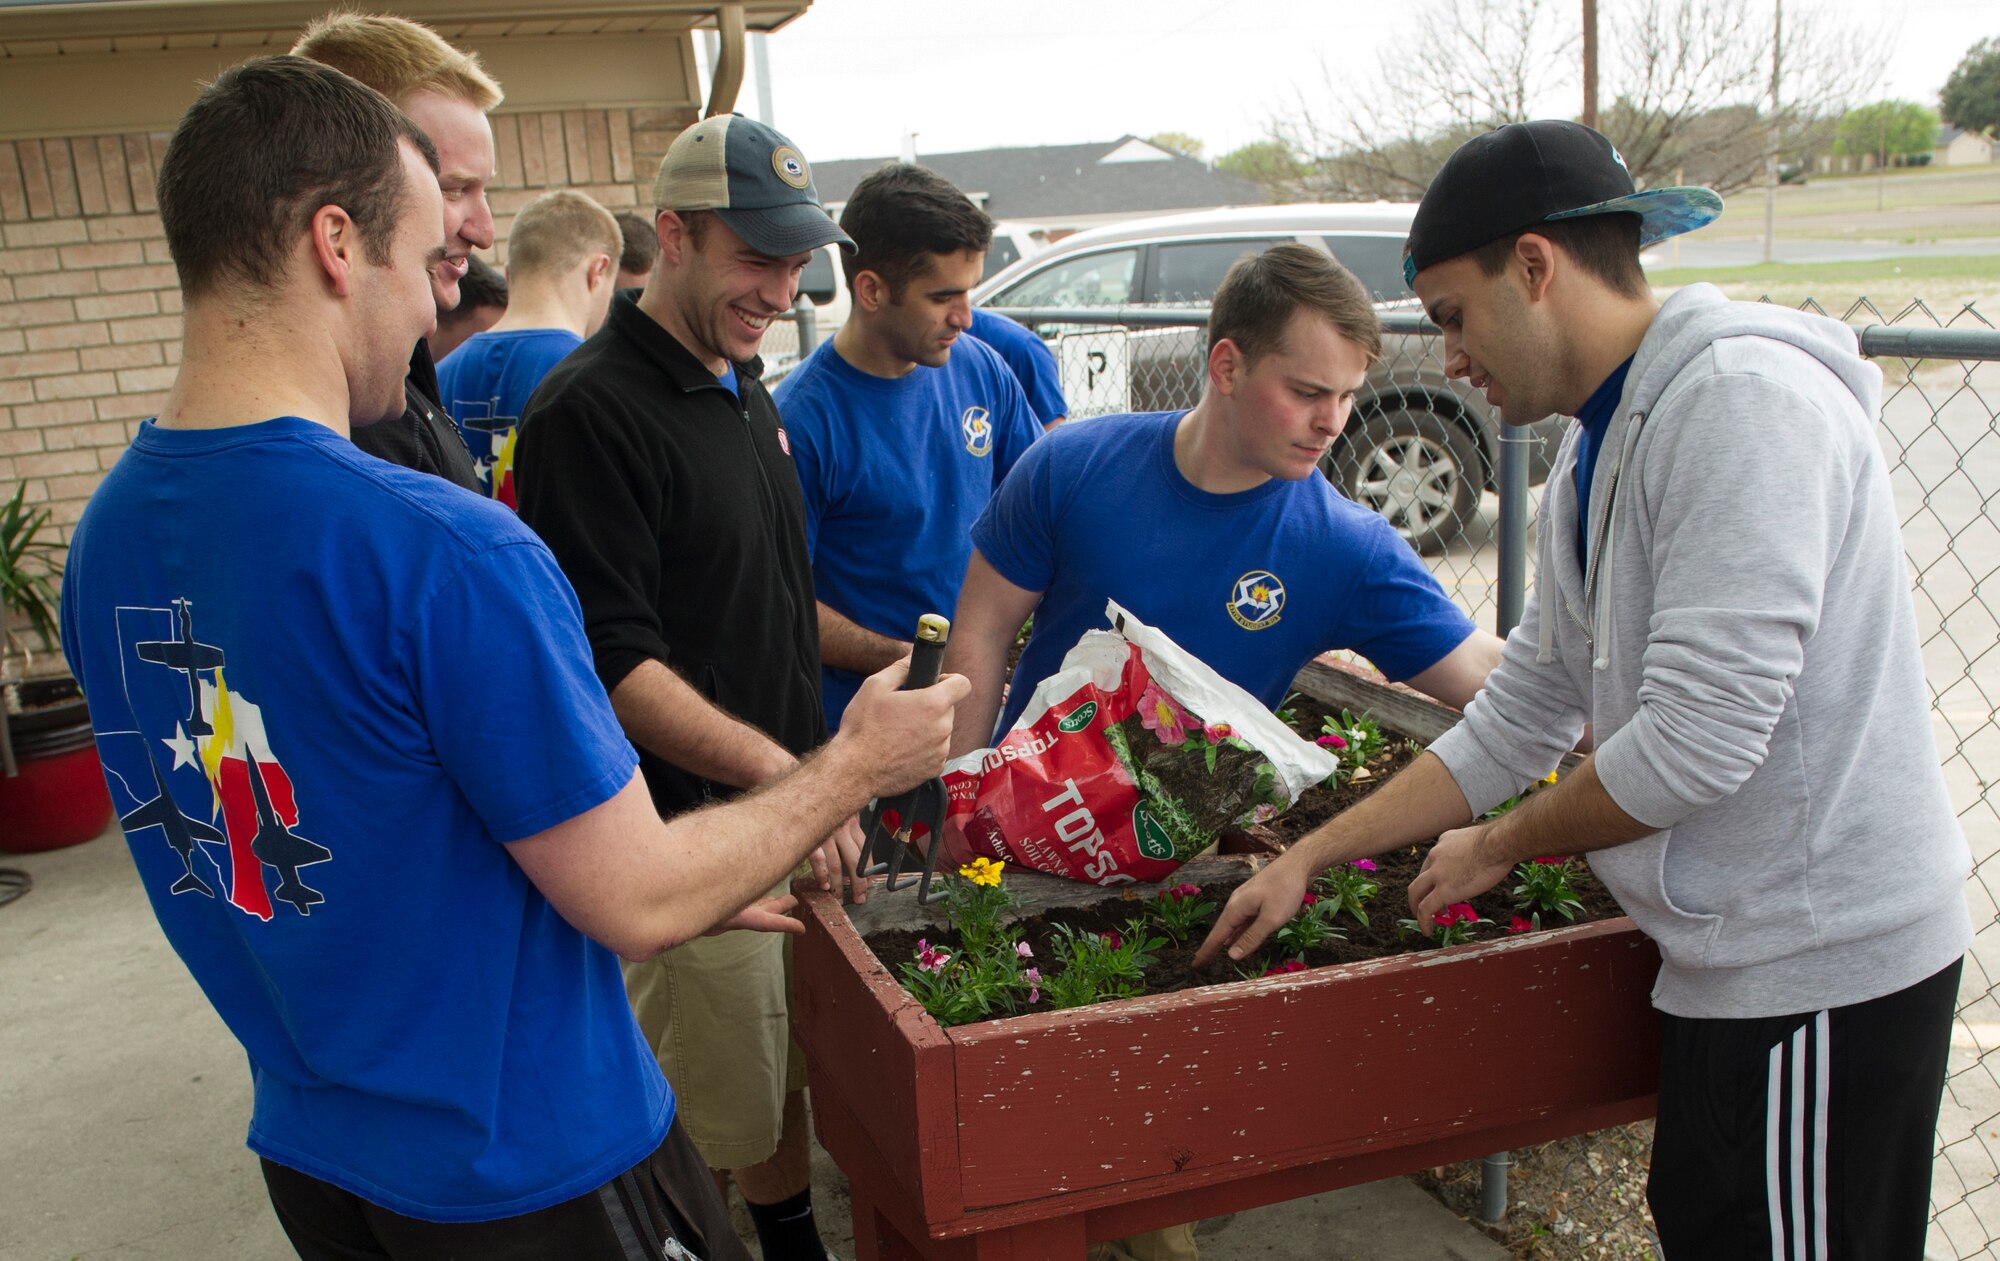 A group of volunteers from the 47th Student Squadron plant flowers at an elderly community in Del Rio, Texas, March 3, 2018. The volunteers were taking part in “STUS Serve Day,” where the 47th STUS gathered nearly 500 volunteers to help at various locations around the community. (U.S. Air Force photo/ Airman 1st Class Benjamin N. Valmoja)